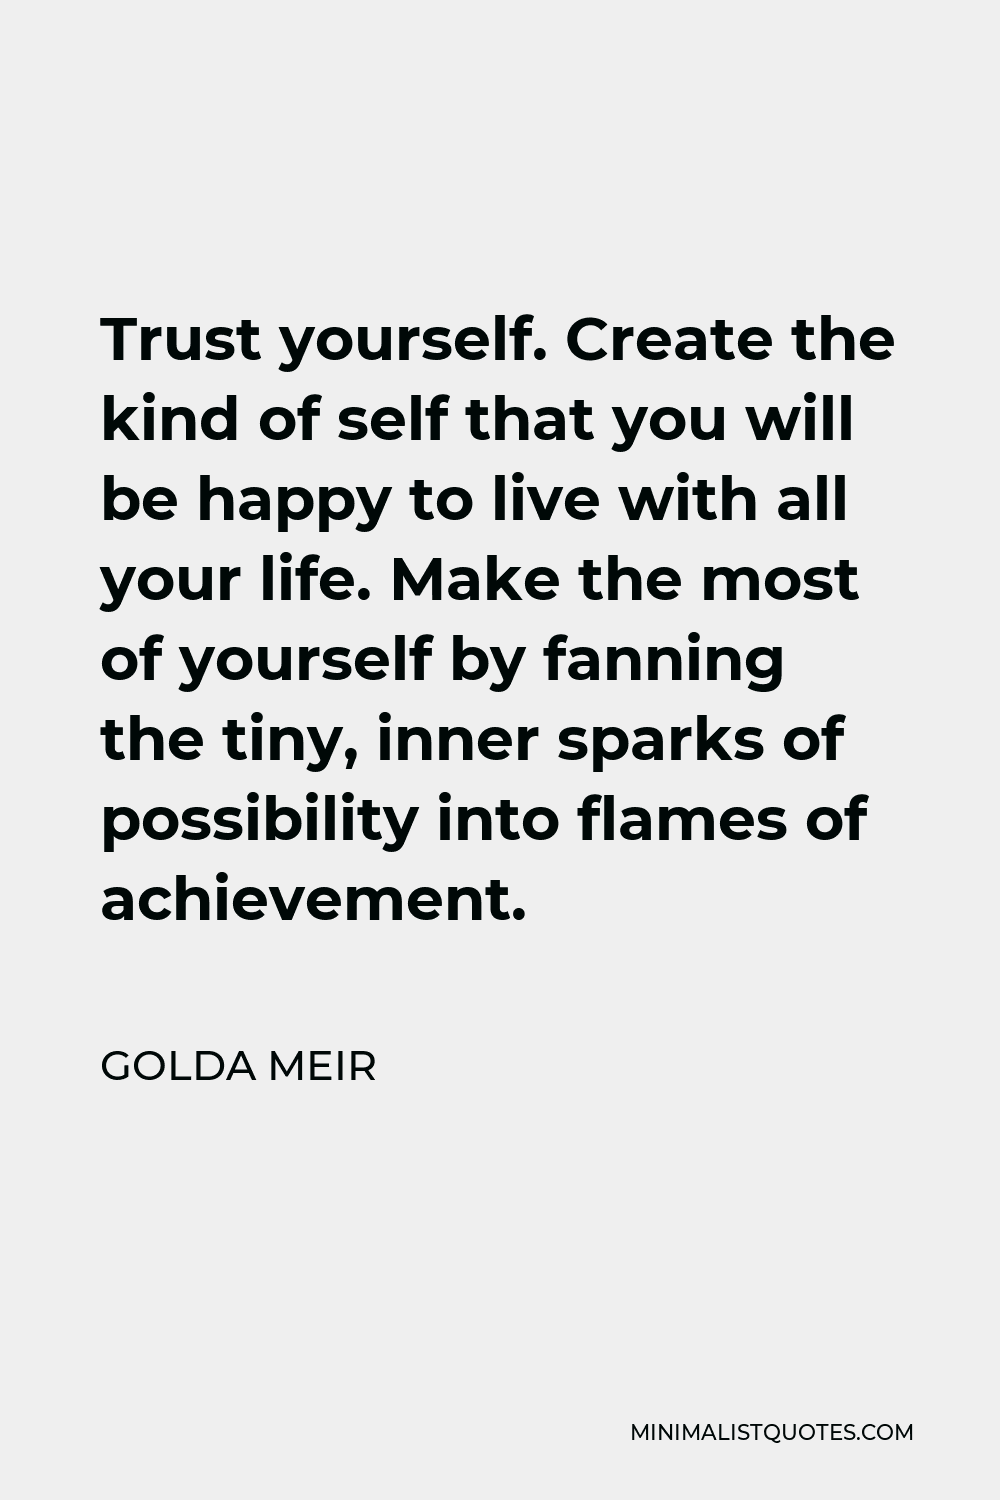 Golda Meir Quote - Trust yourself. Create the kind of self that you will be happy to live with all your life. Make the most of yourself by fanning the tiny, inner sparks of possibility into flames of achievement.